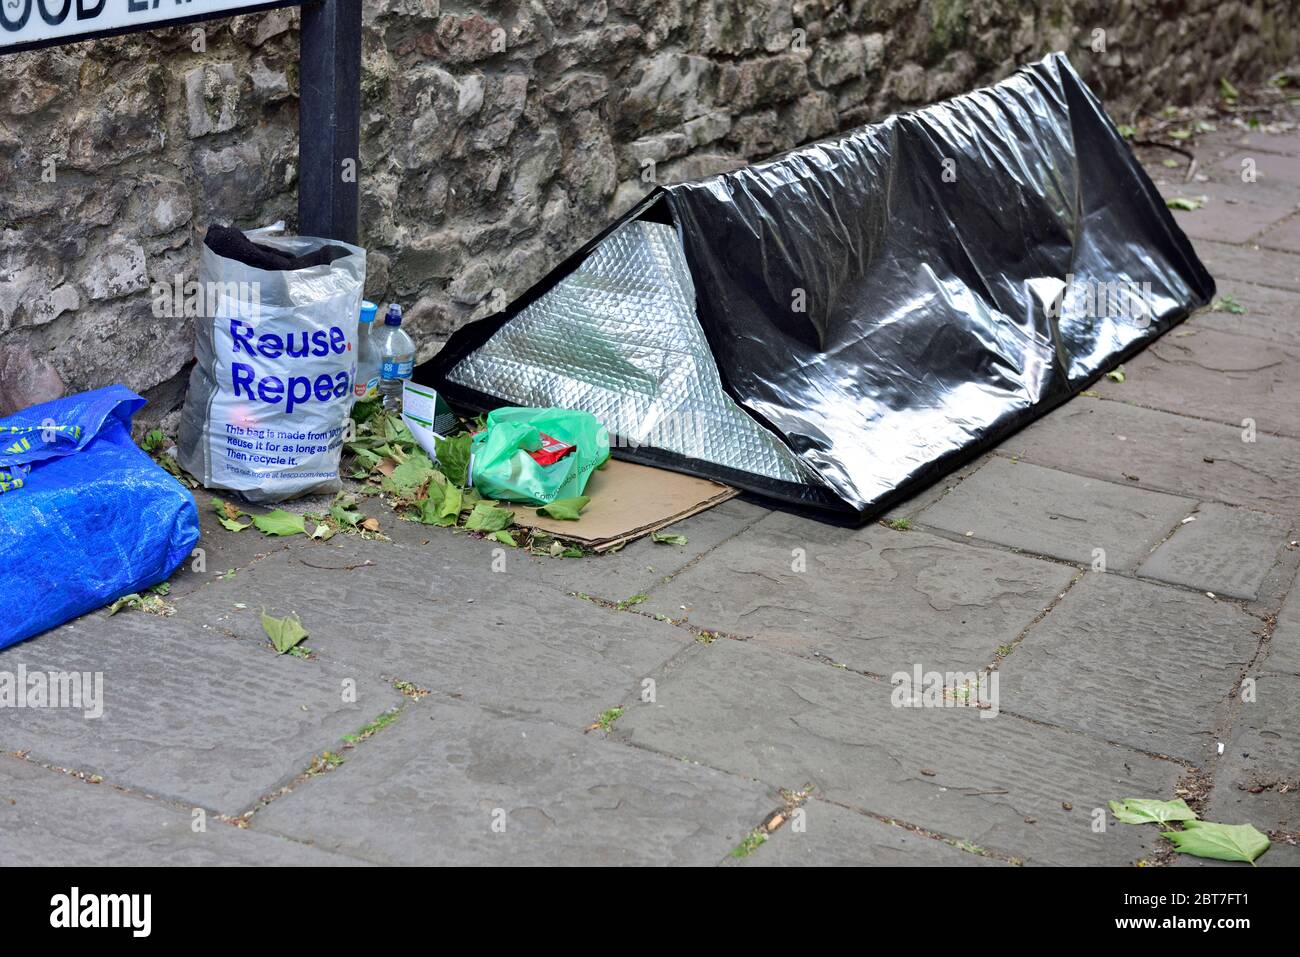 Temporary homeless shelter on street in Bristol, England. Provided by charity Stock Photo